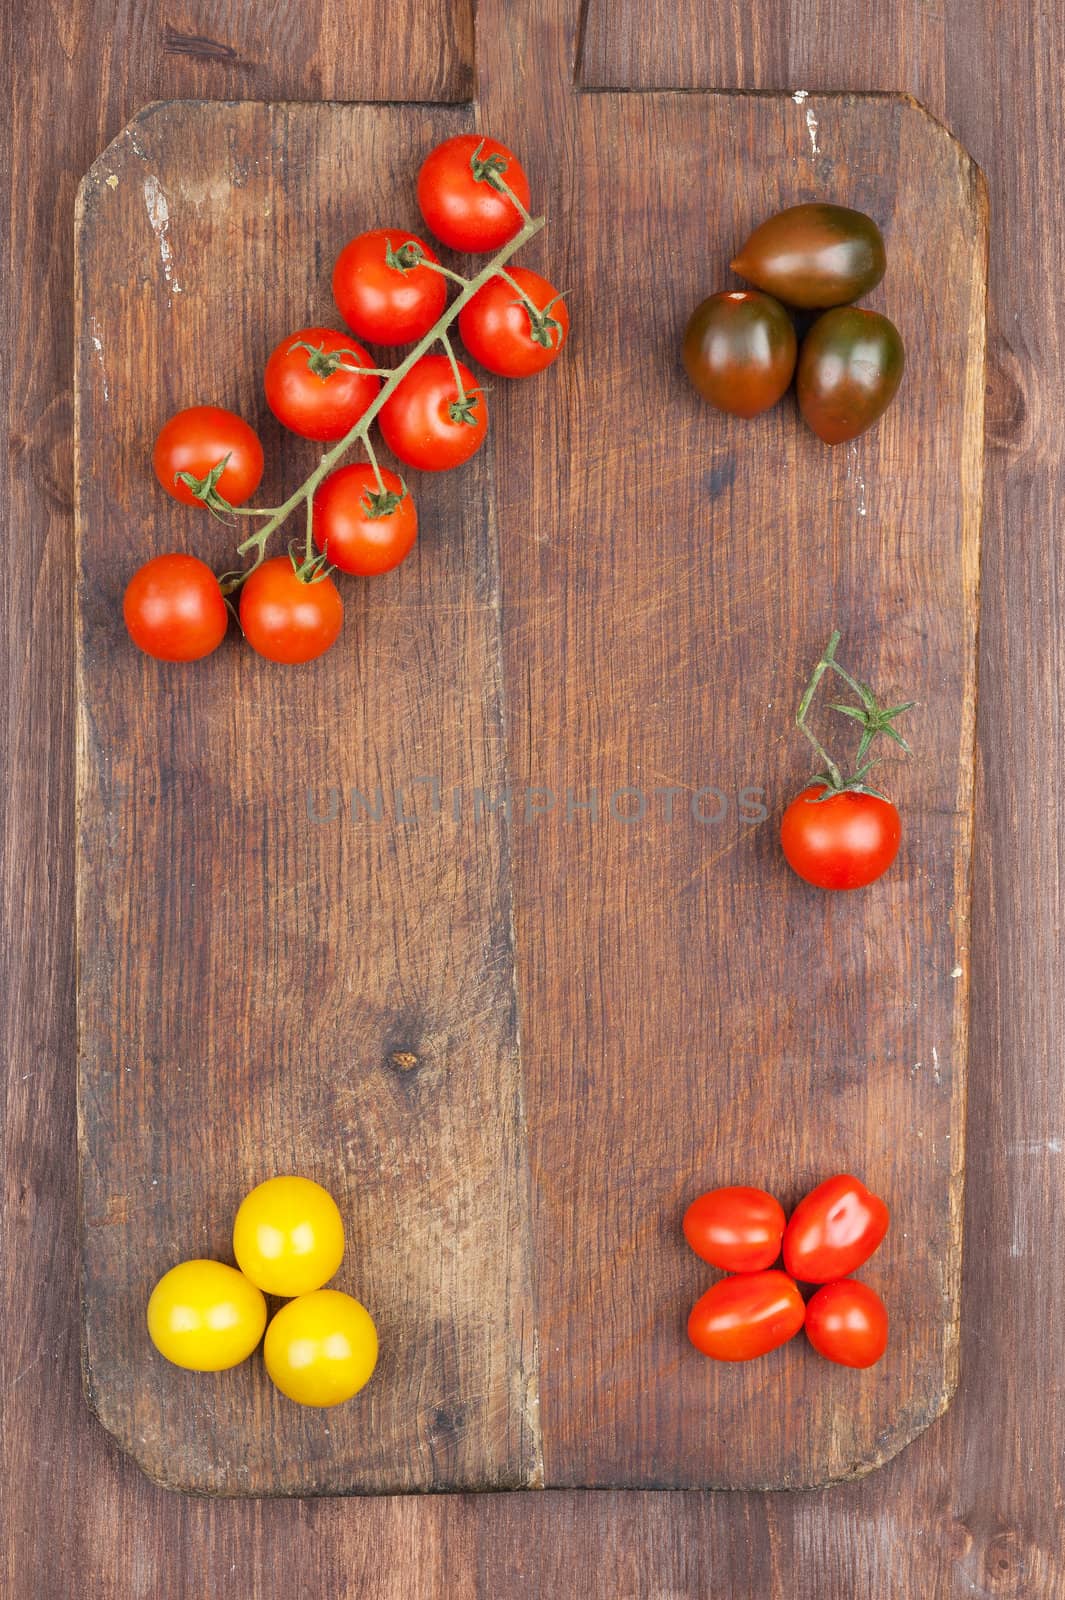 Set of different varieties of cherry tomatoes on a dark wooden background